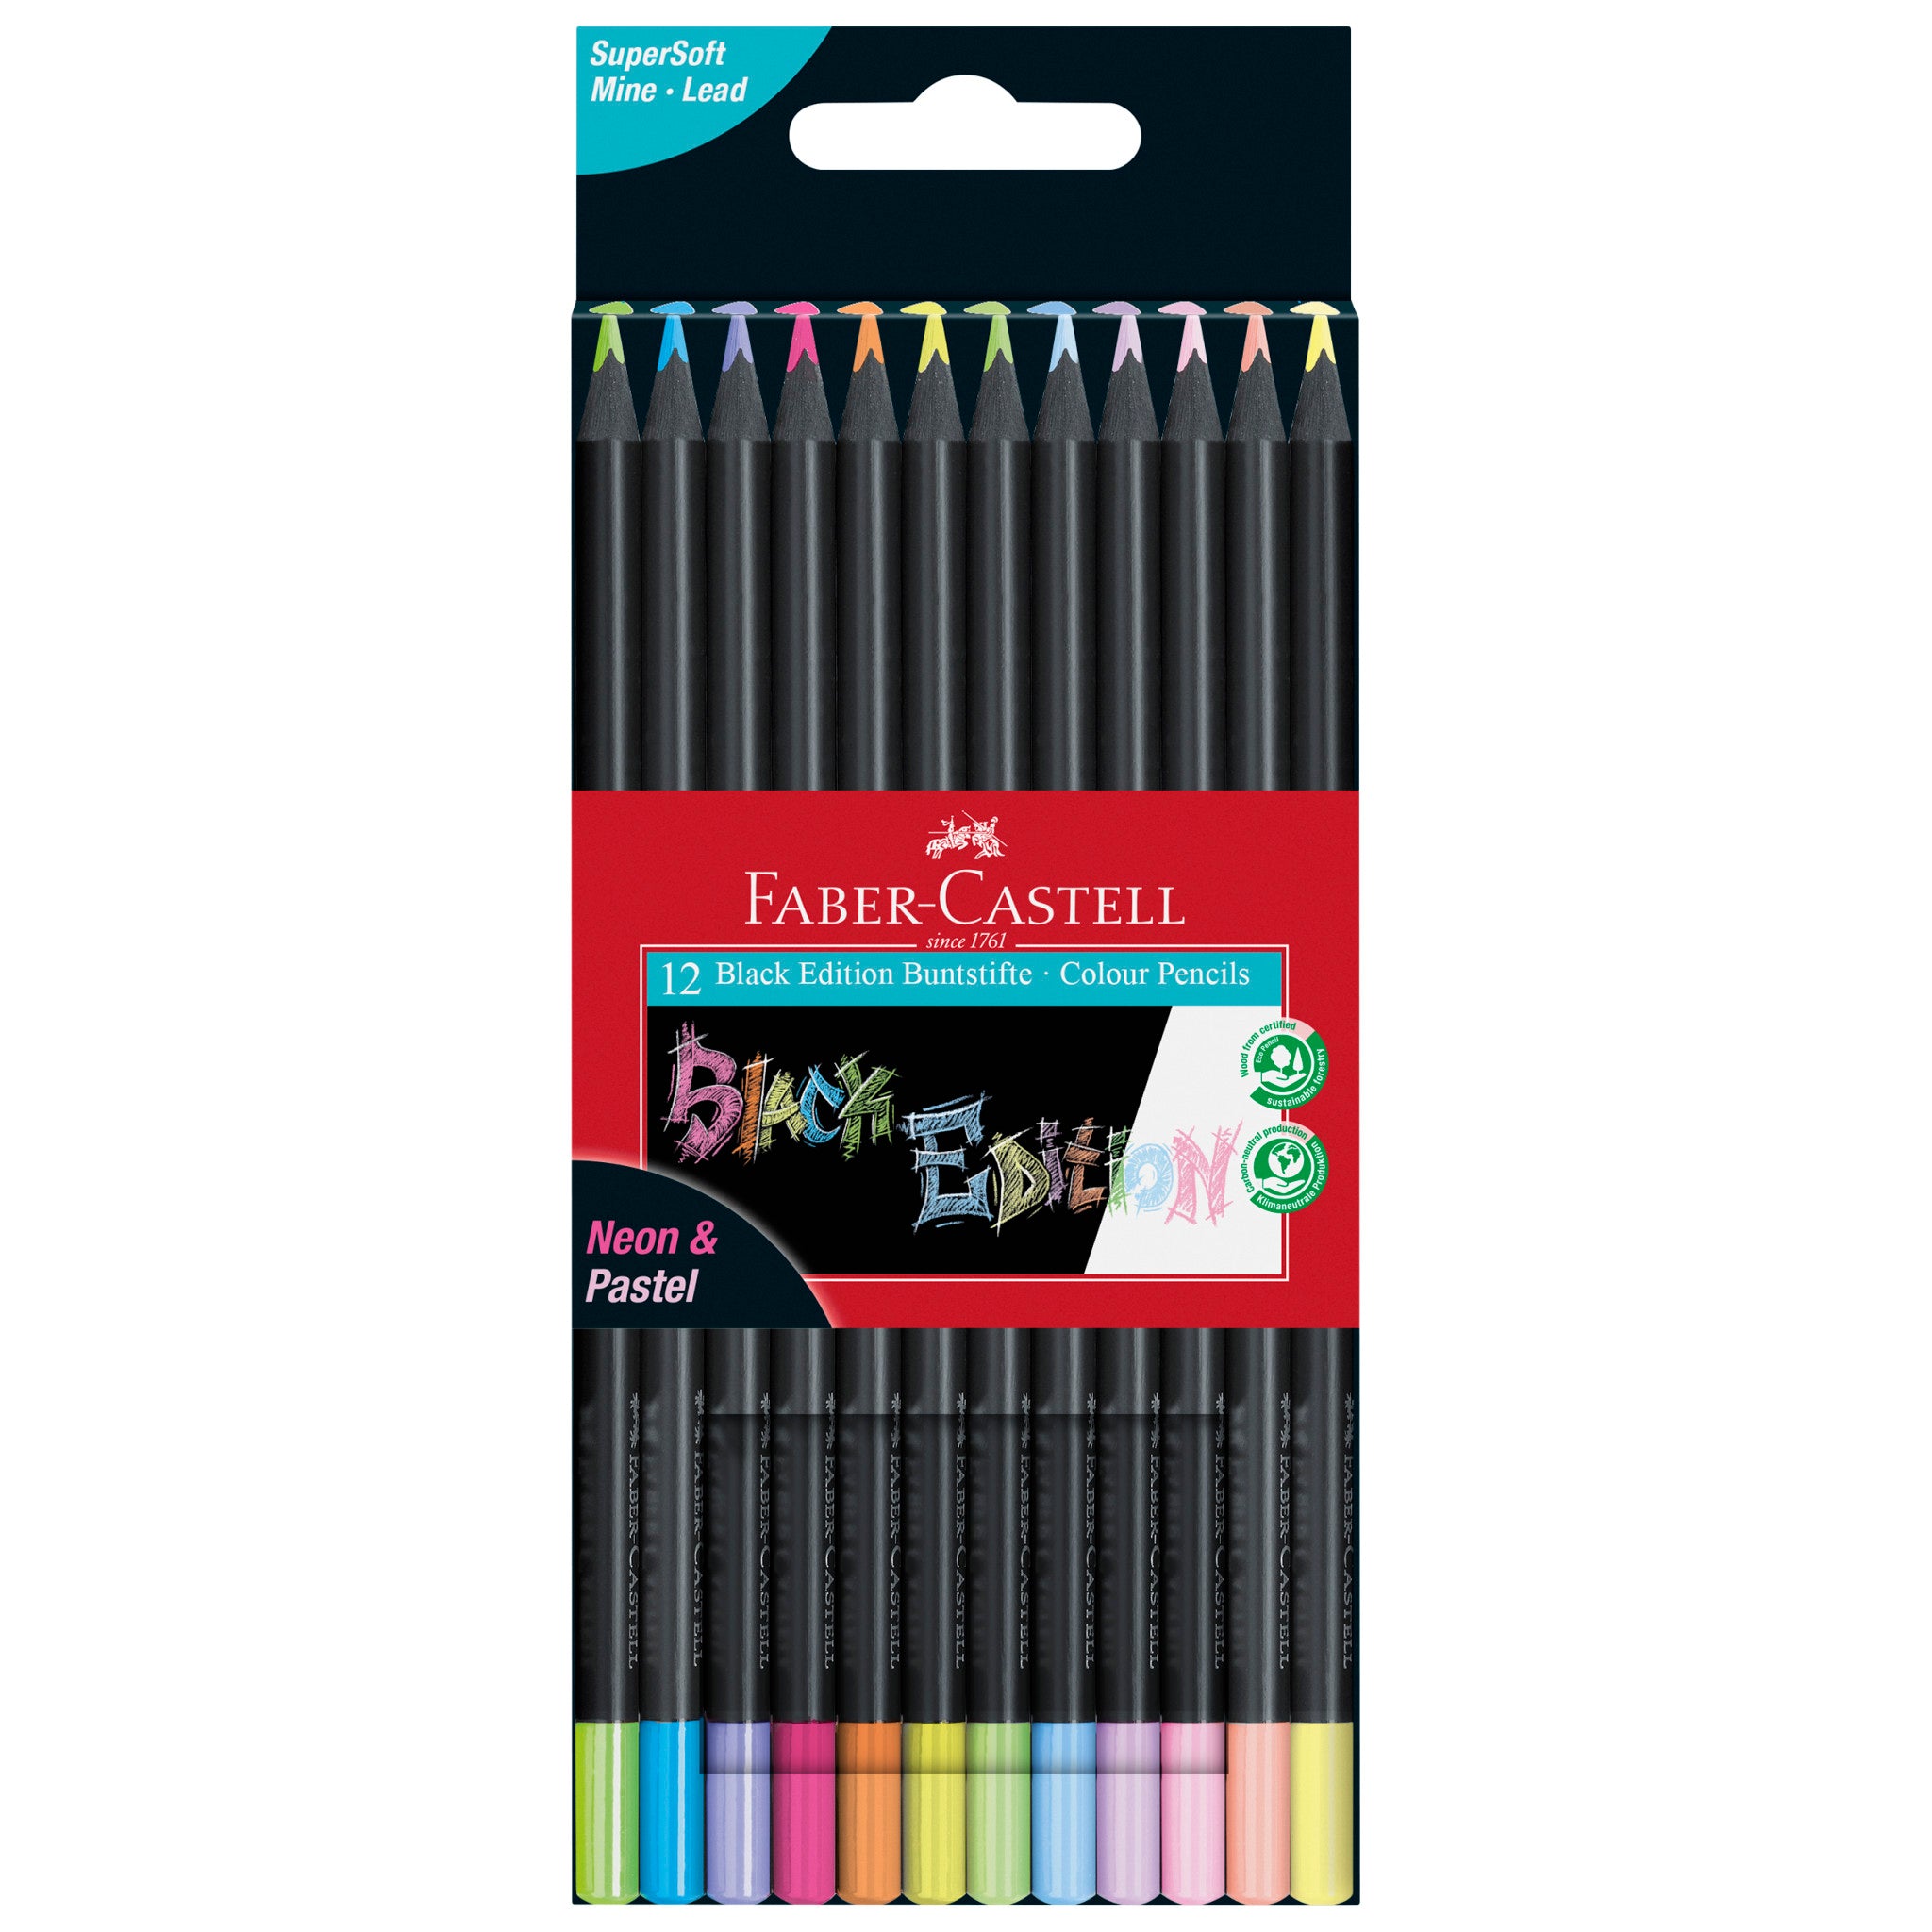 U Brands Chalkboard Colored Pencils, Assorted 6 Count (Pack of 1)